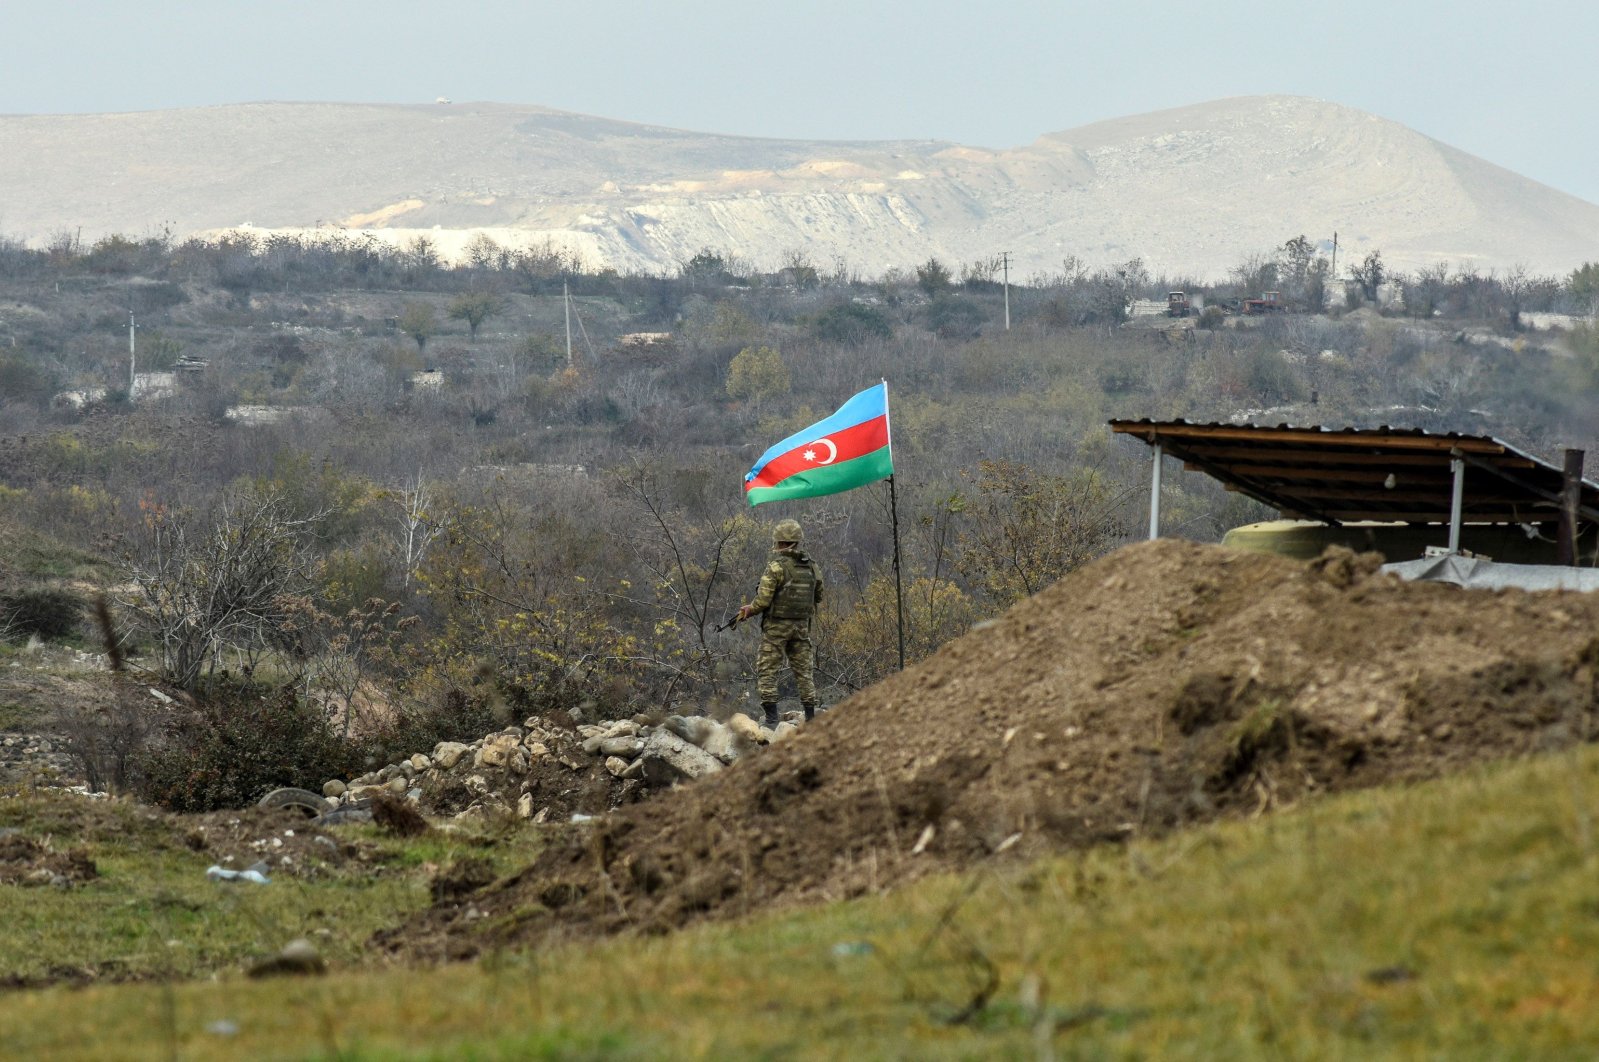 An Azerbaijani soldier stands guard at a checkpoint on a road entering Fuzuli from Hadrut a day after Baku's army entered the final district given up by Armenia under a peace deal that ended weeks of fighting over the Nagorno-Karabakh region, Azerbaijan, Dec. 2, 2020. (AFP Photo)